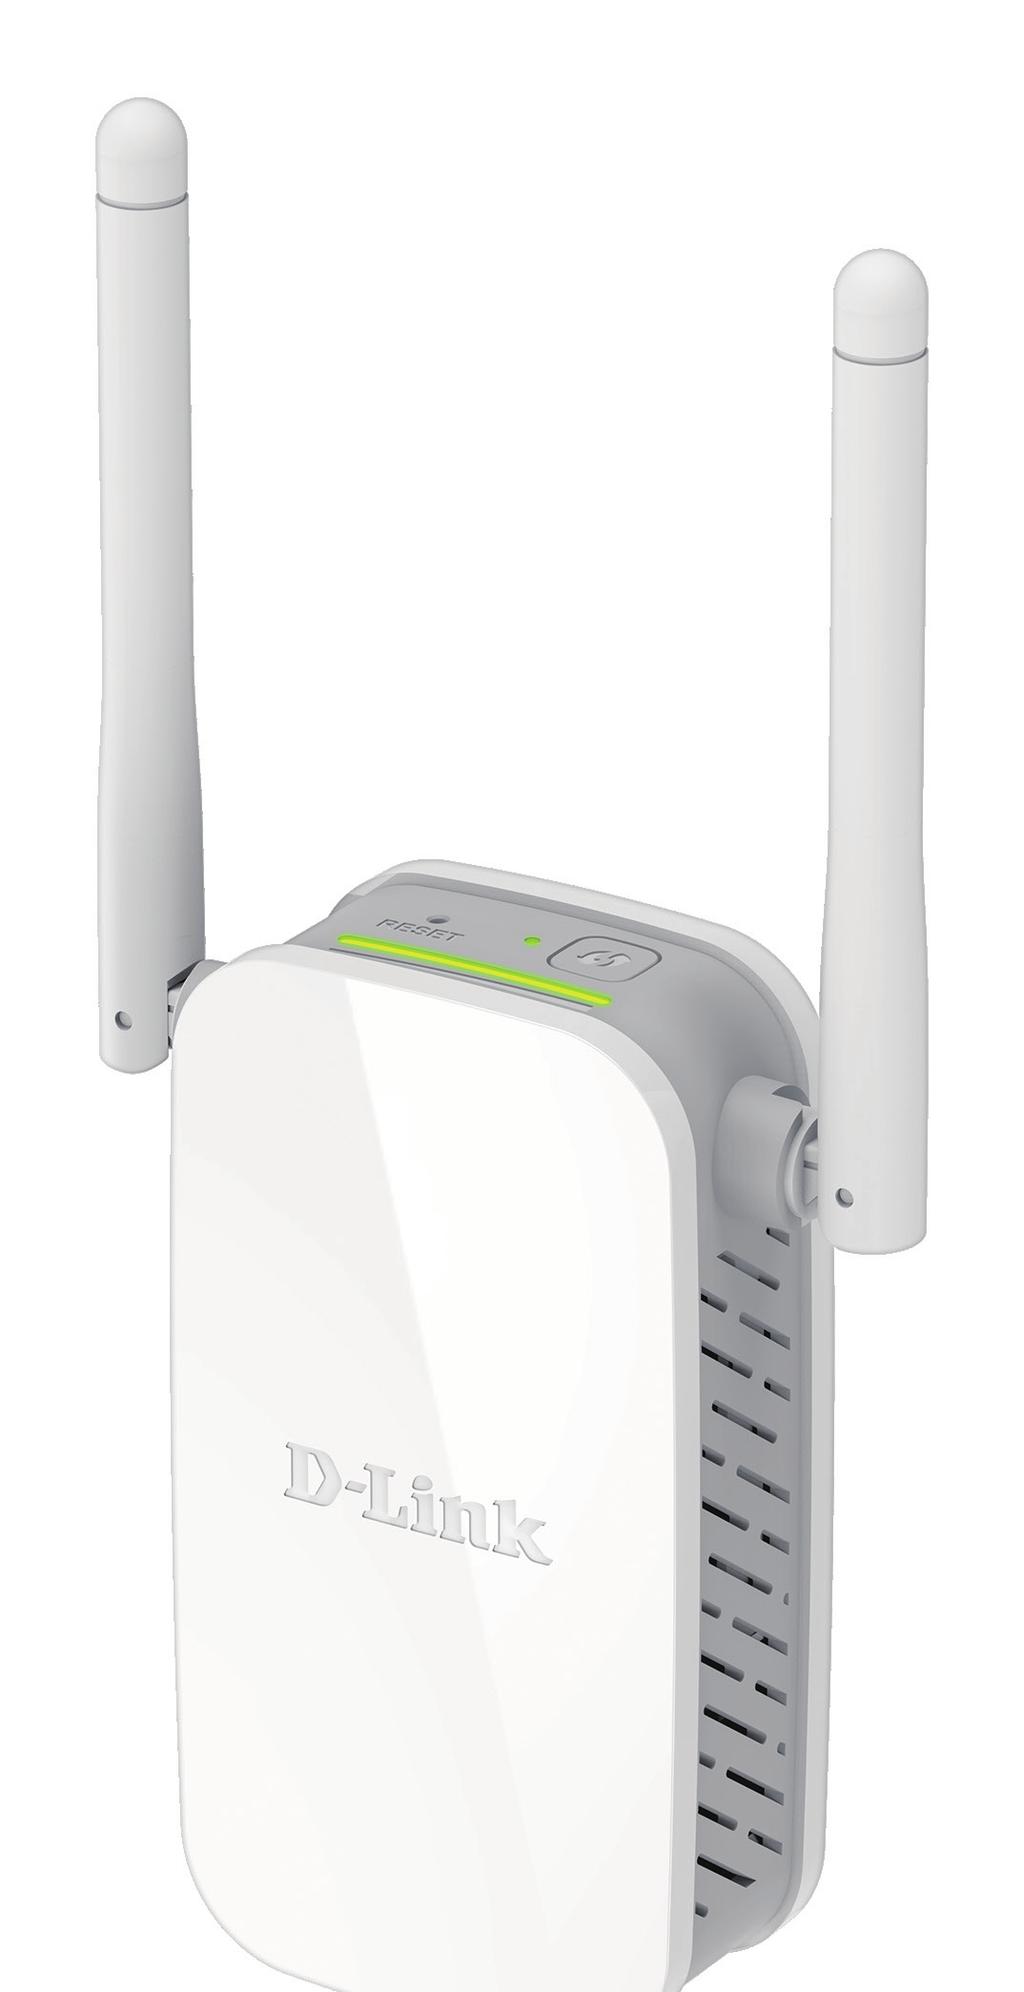 Section 3 - Configuration WPS-PBC Configuration To connect to a wireless router or access point and extend the Wi-Fi network in your home, first make sure the source router or Access Point features a